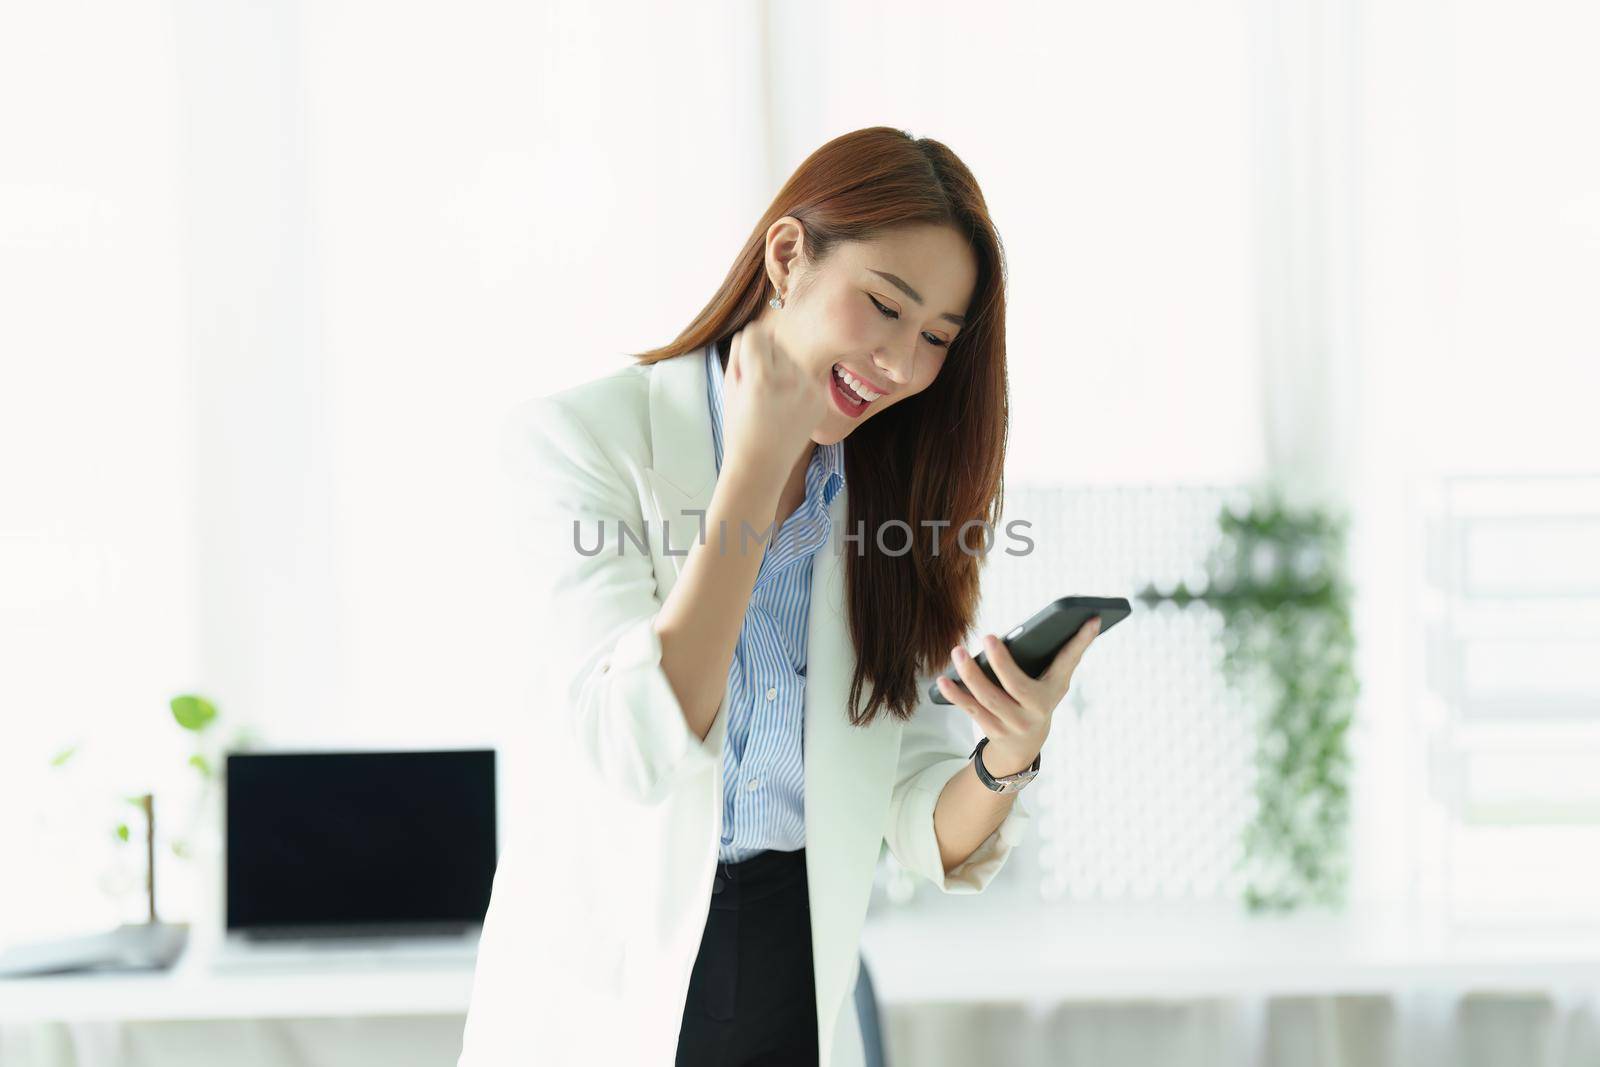 Portrait of a successful Asian businesswoman or business owner expressing excitement and joy using a smartphone mobile in the office.